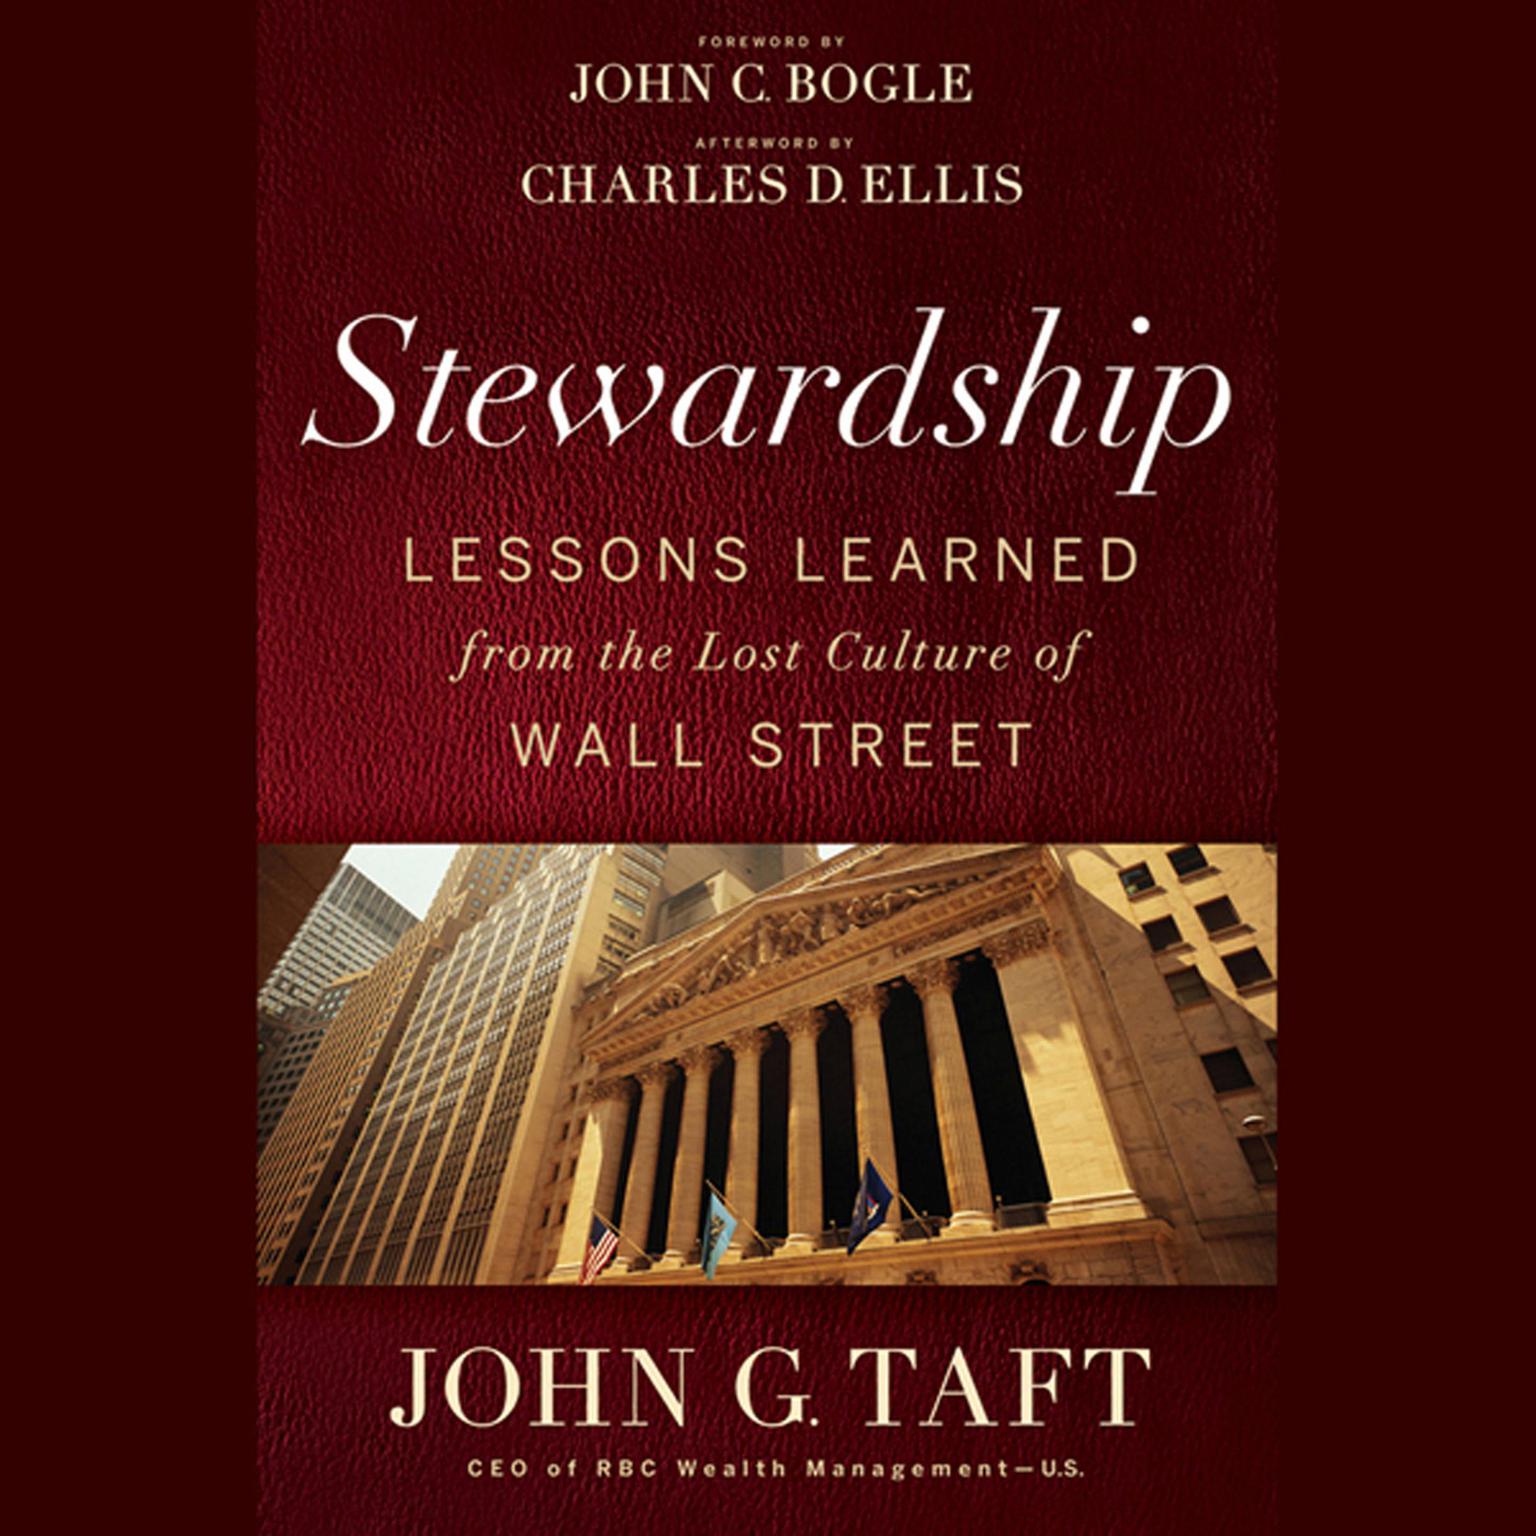 Stewardship: Lessons Learned from the Lost Culture of Wall Street Audiobook, by Charles D. Ellis